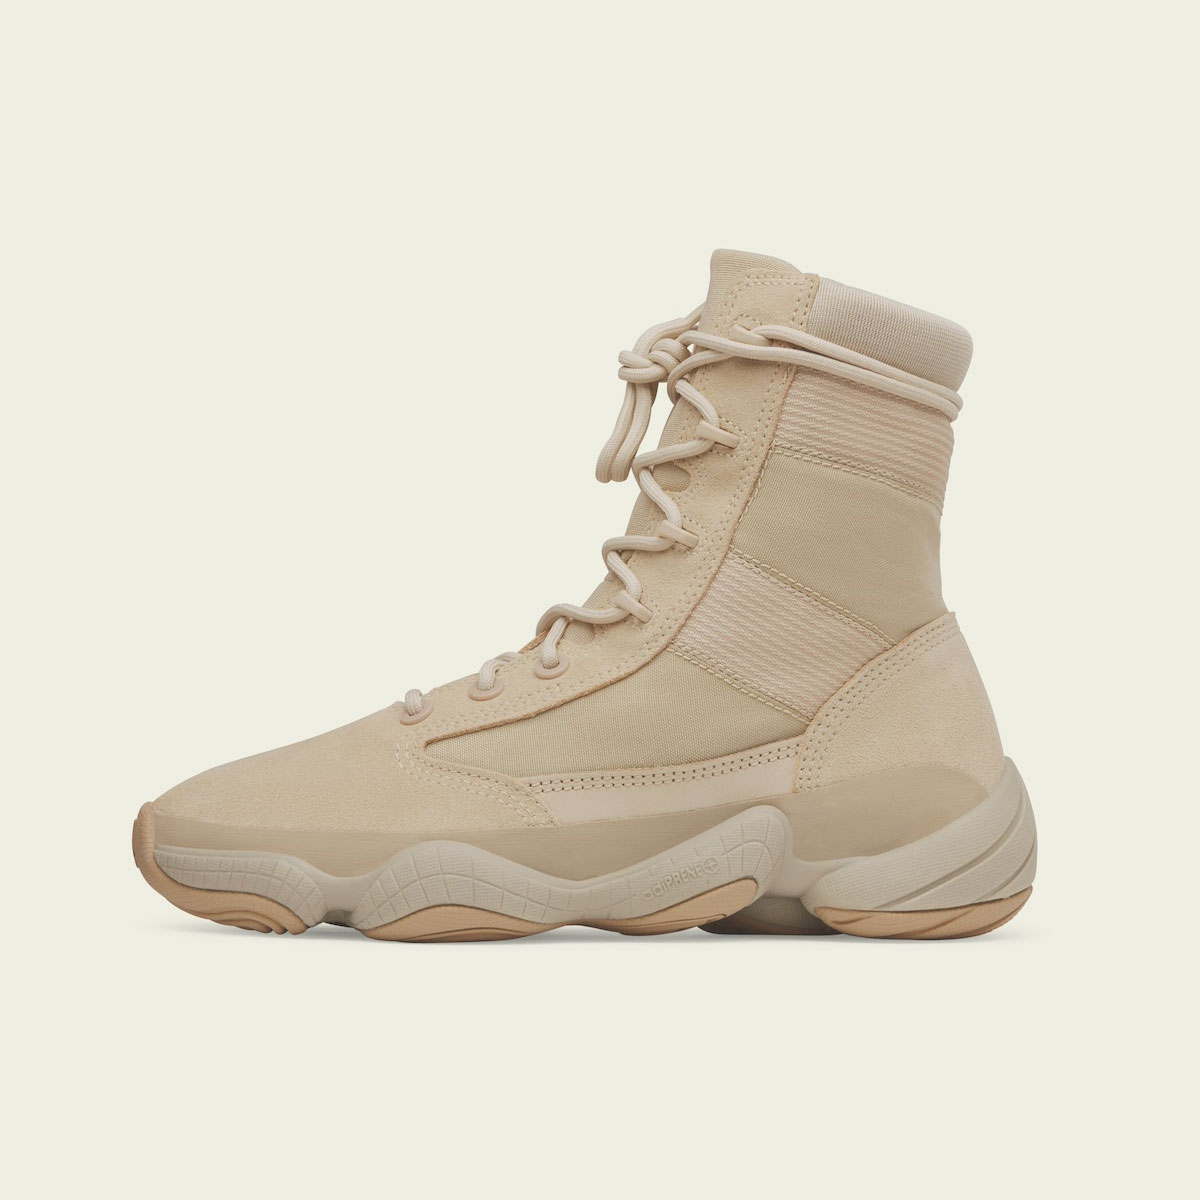 adidas Yeezy 500 High Tactical Boot “Sand” IF7549